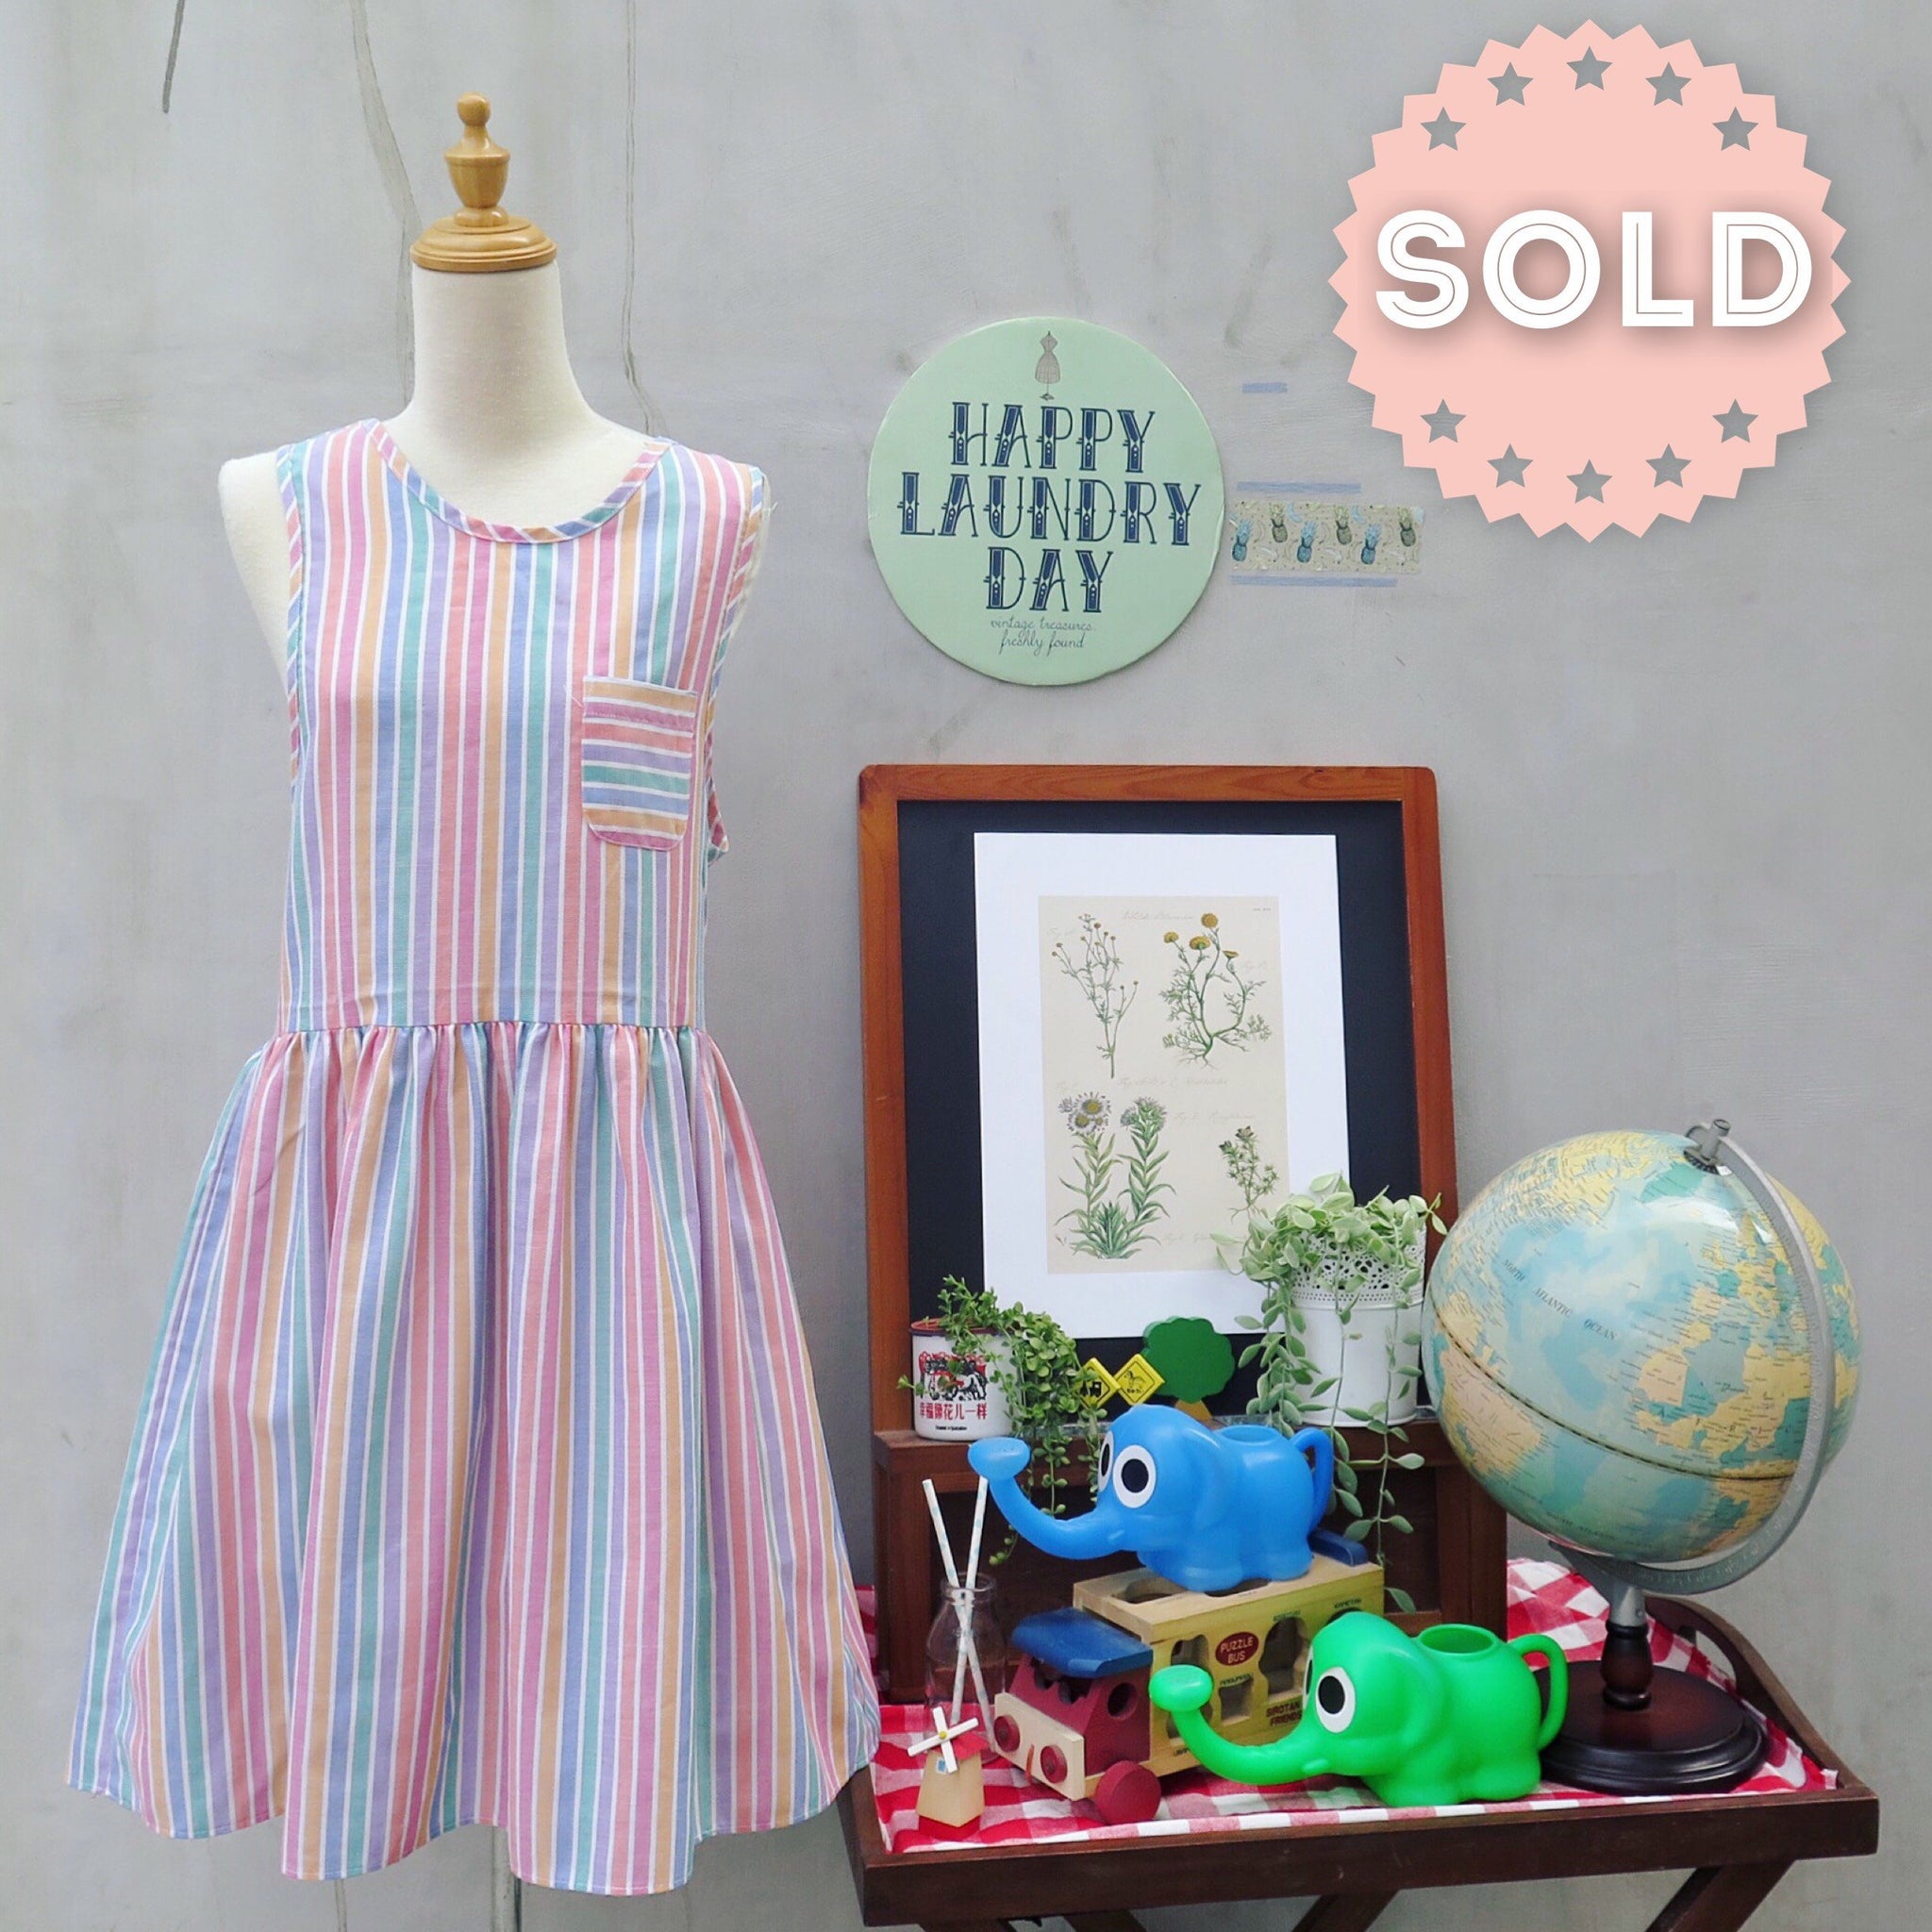 Oh jolly lolly | Vintage 1970s 1980s Summer Ice Lolly striped Jumper dress